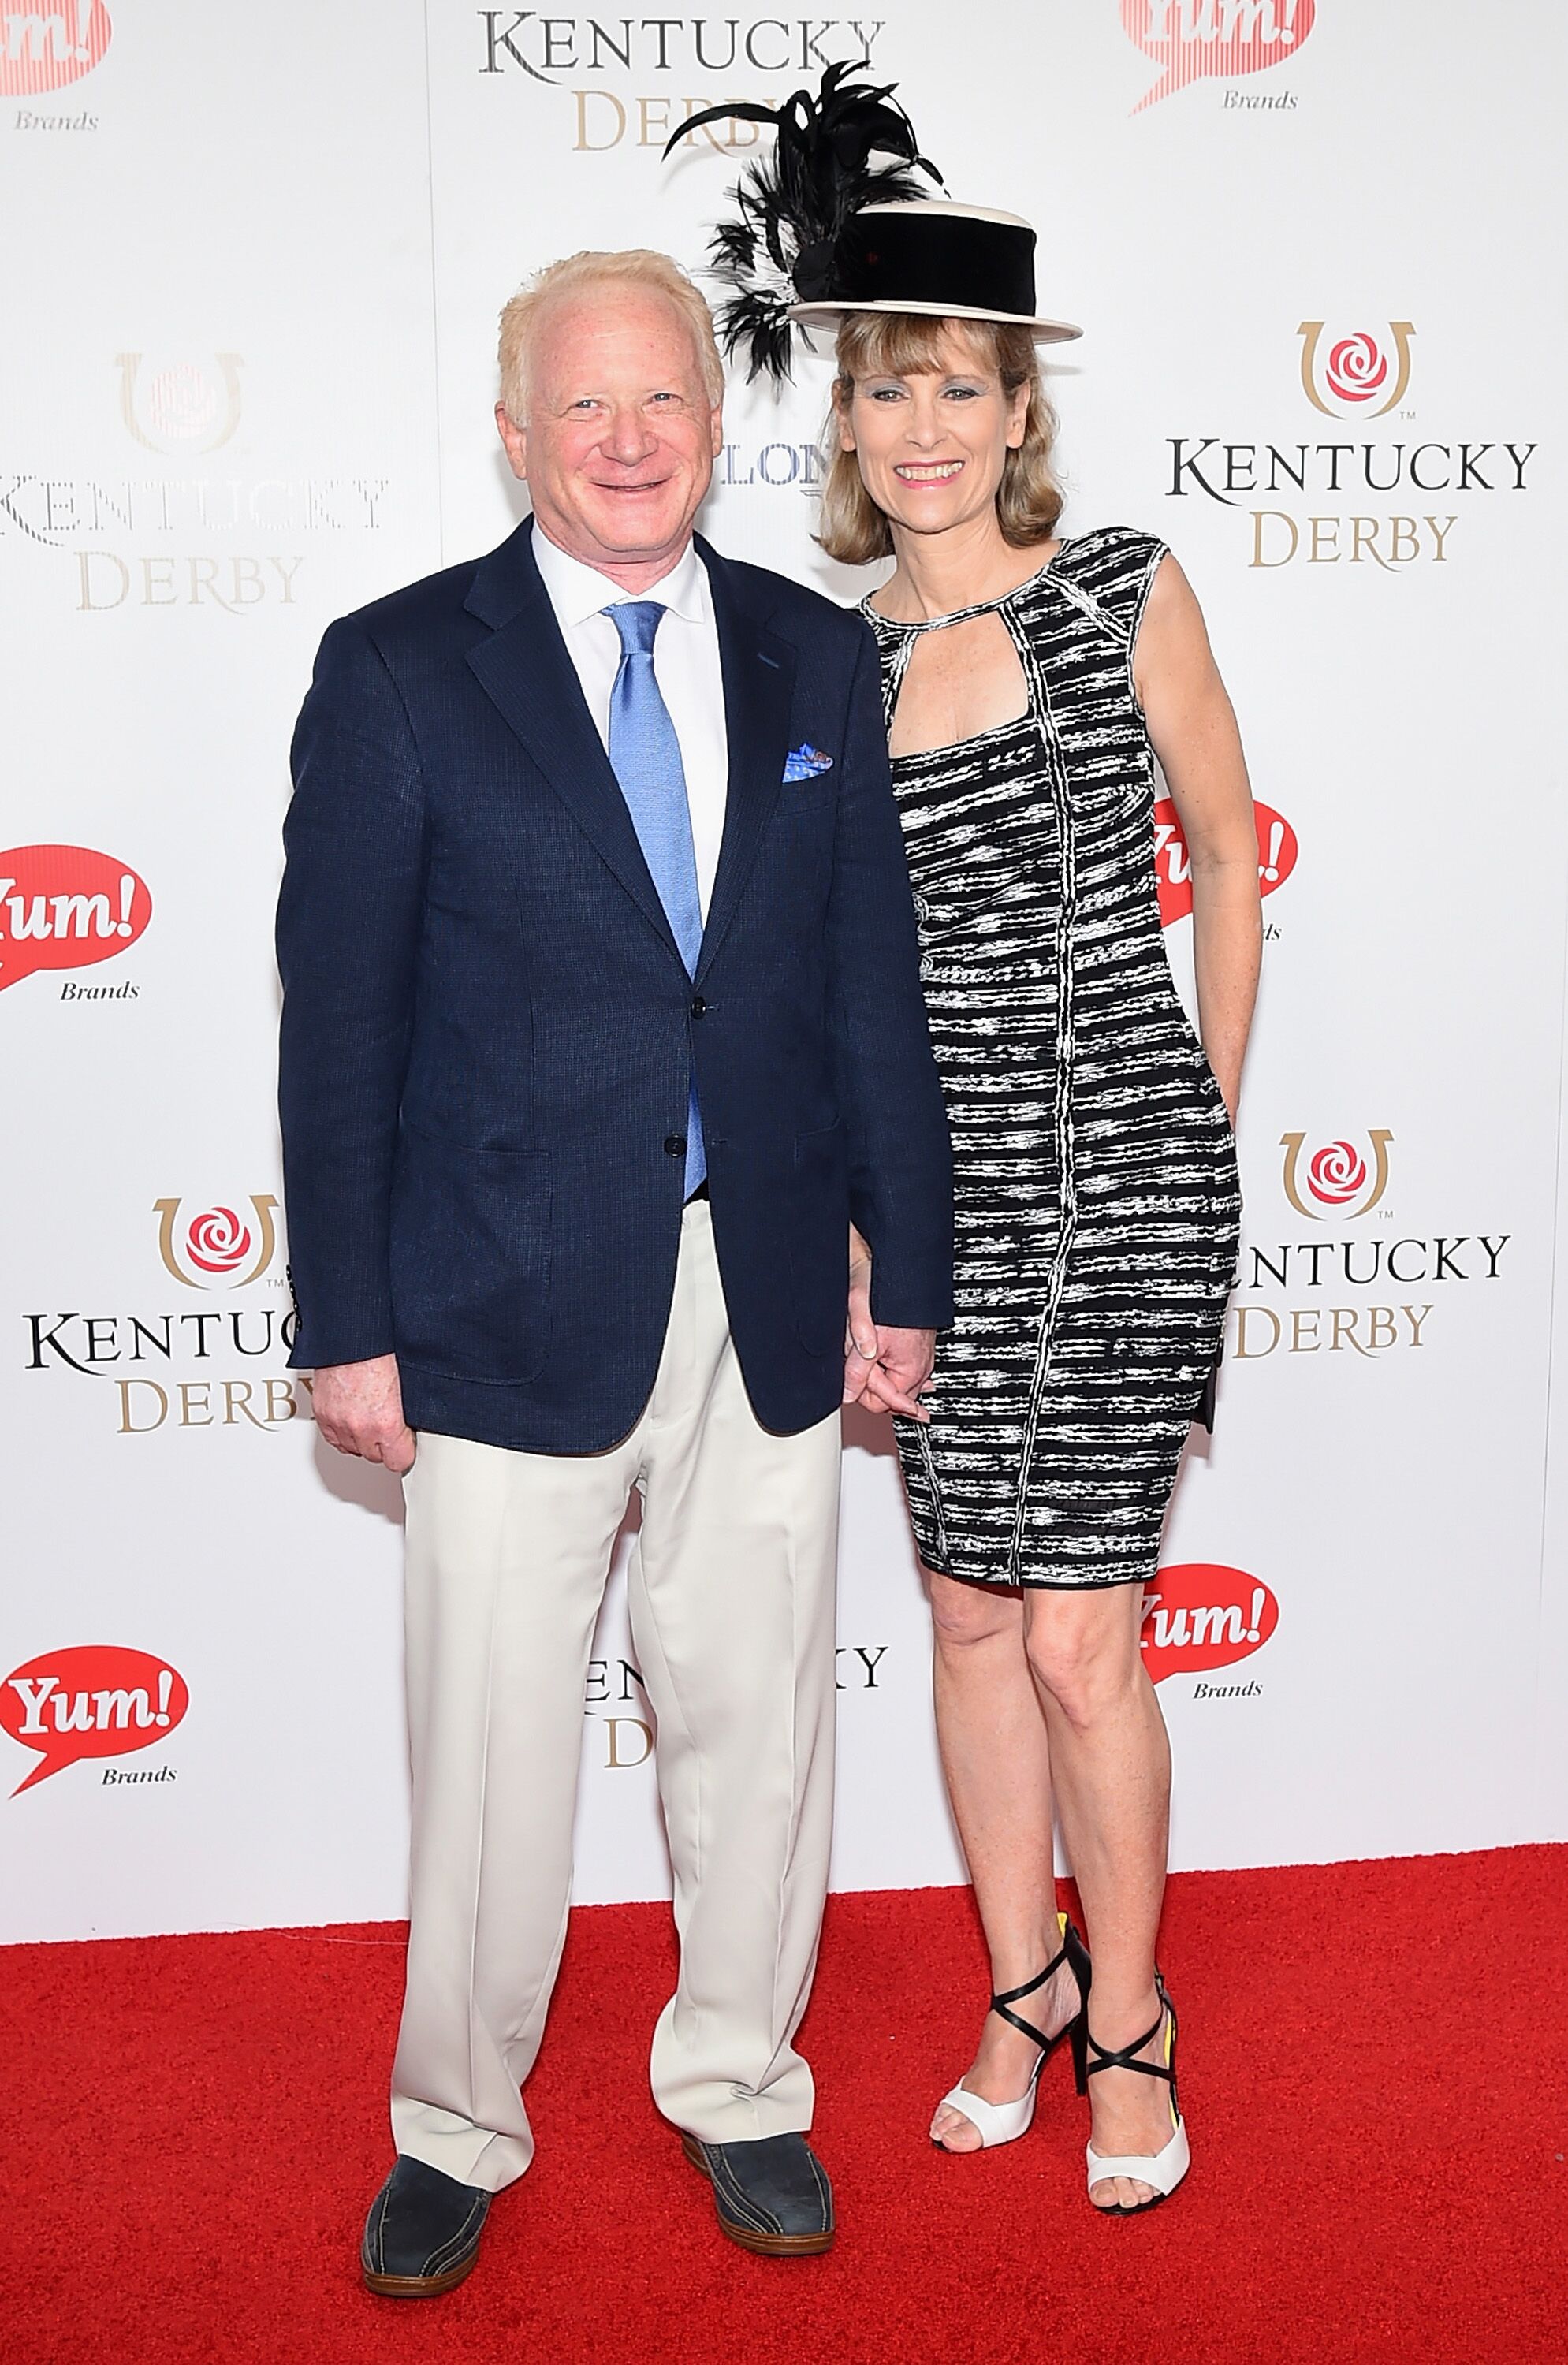  Don Most and Morgan Hart attend the 141st Kentucky Derby at Churchill Downs on May 2, 2015 in Louisville, Kentucky. | Source: Getty Images